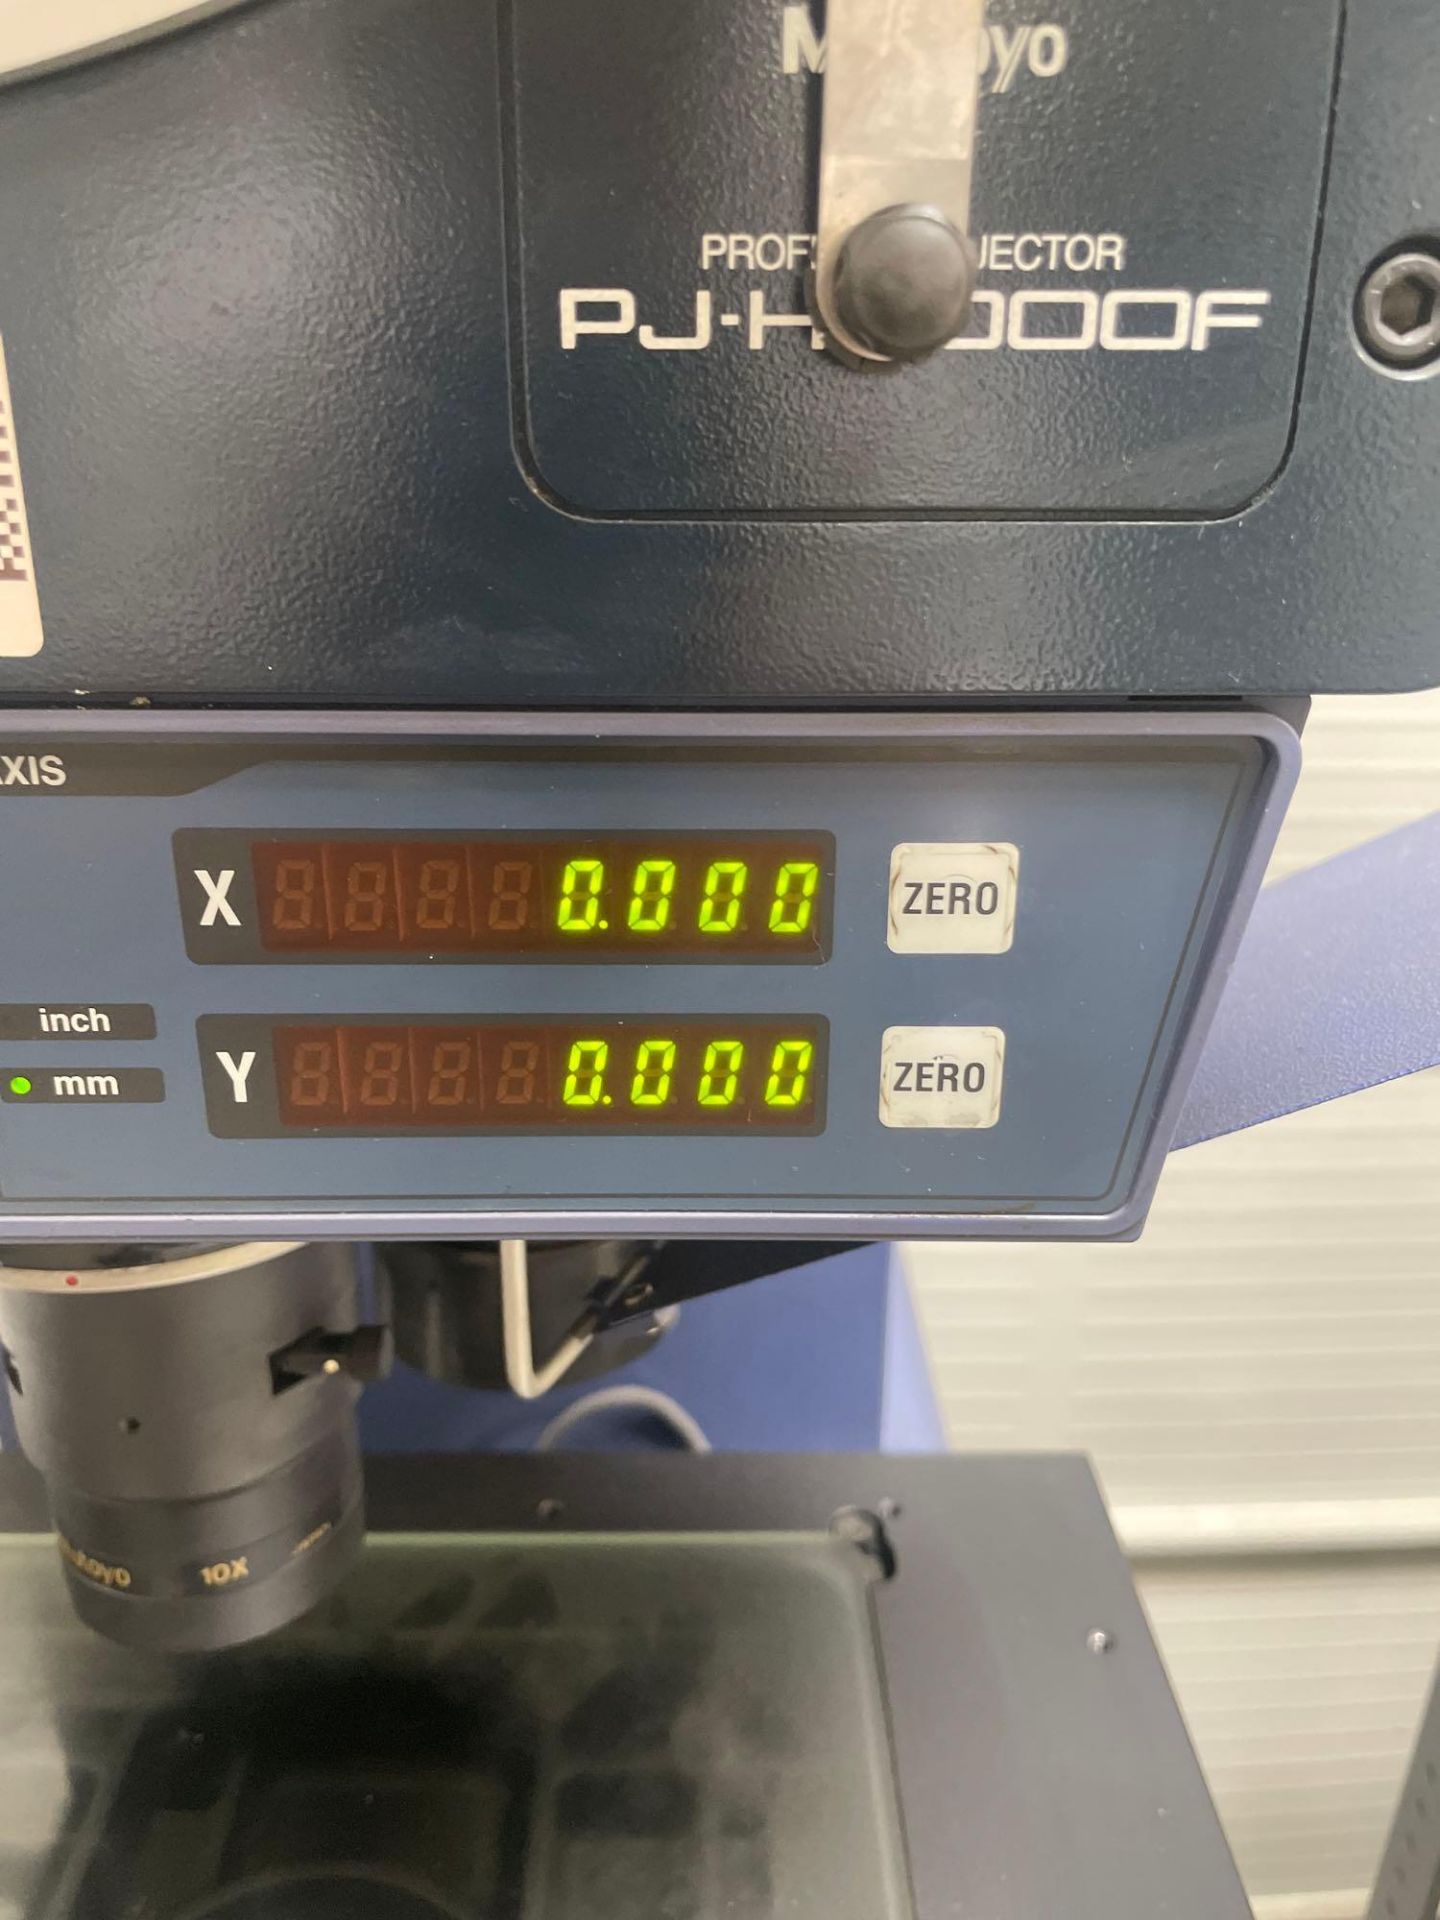 Mitutoyo PJ-H3000F Optical Comparator - Image 2 of 6